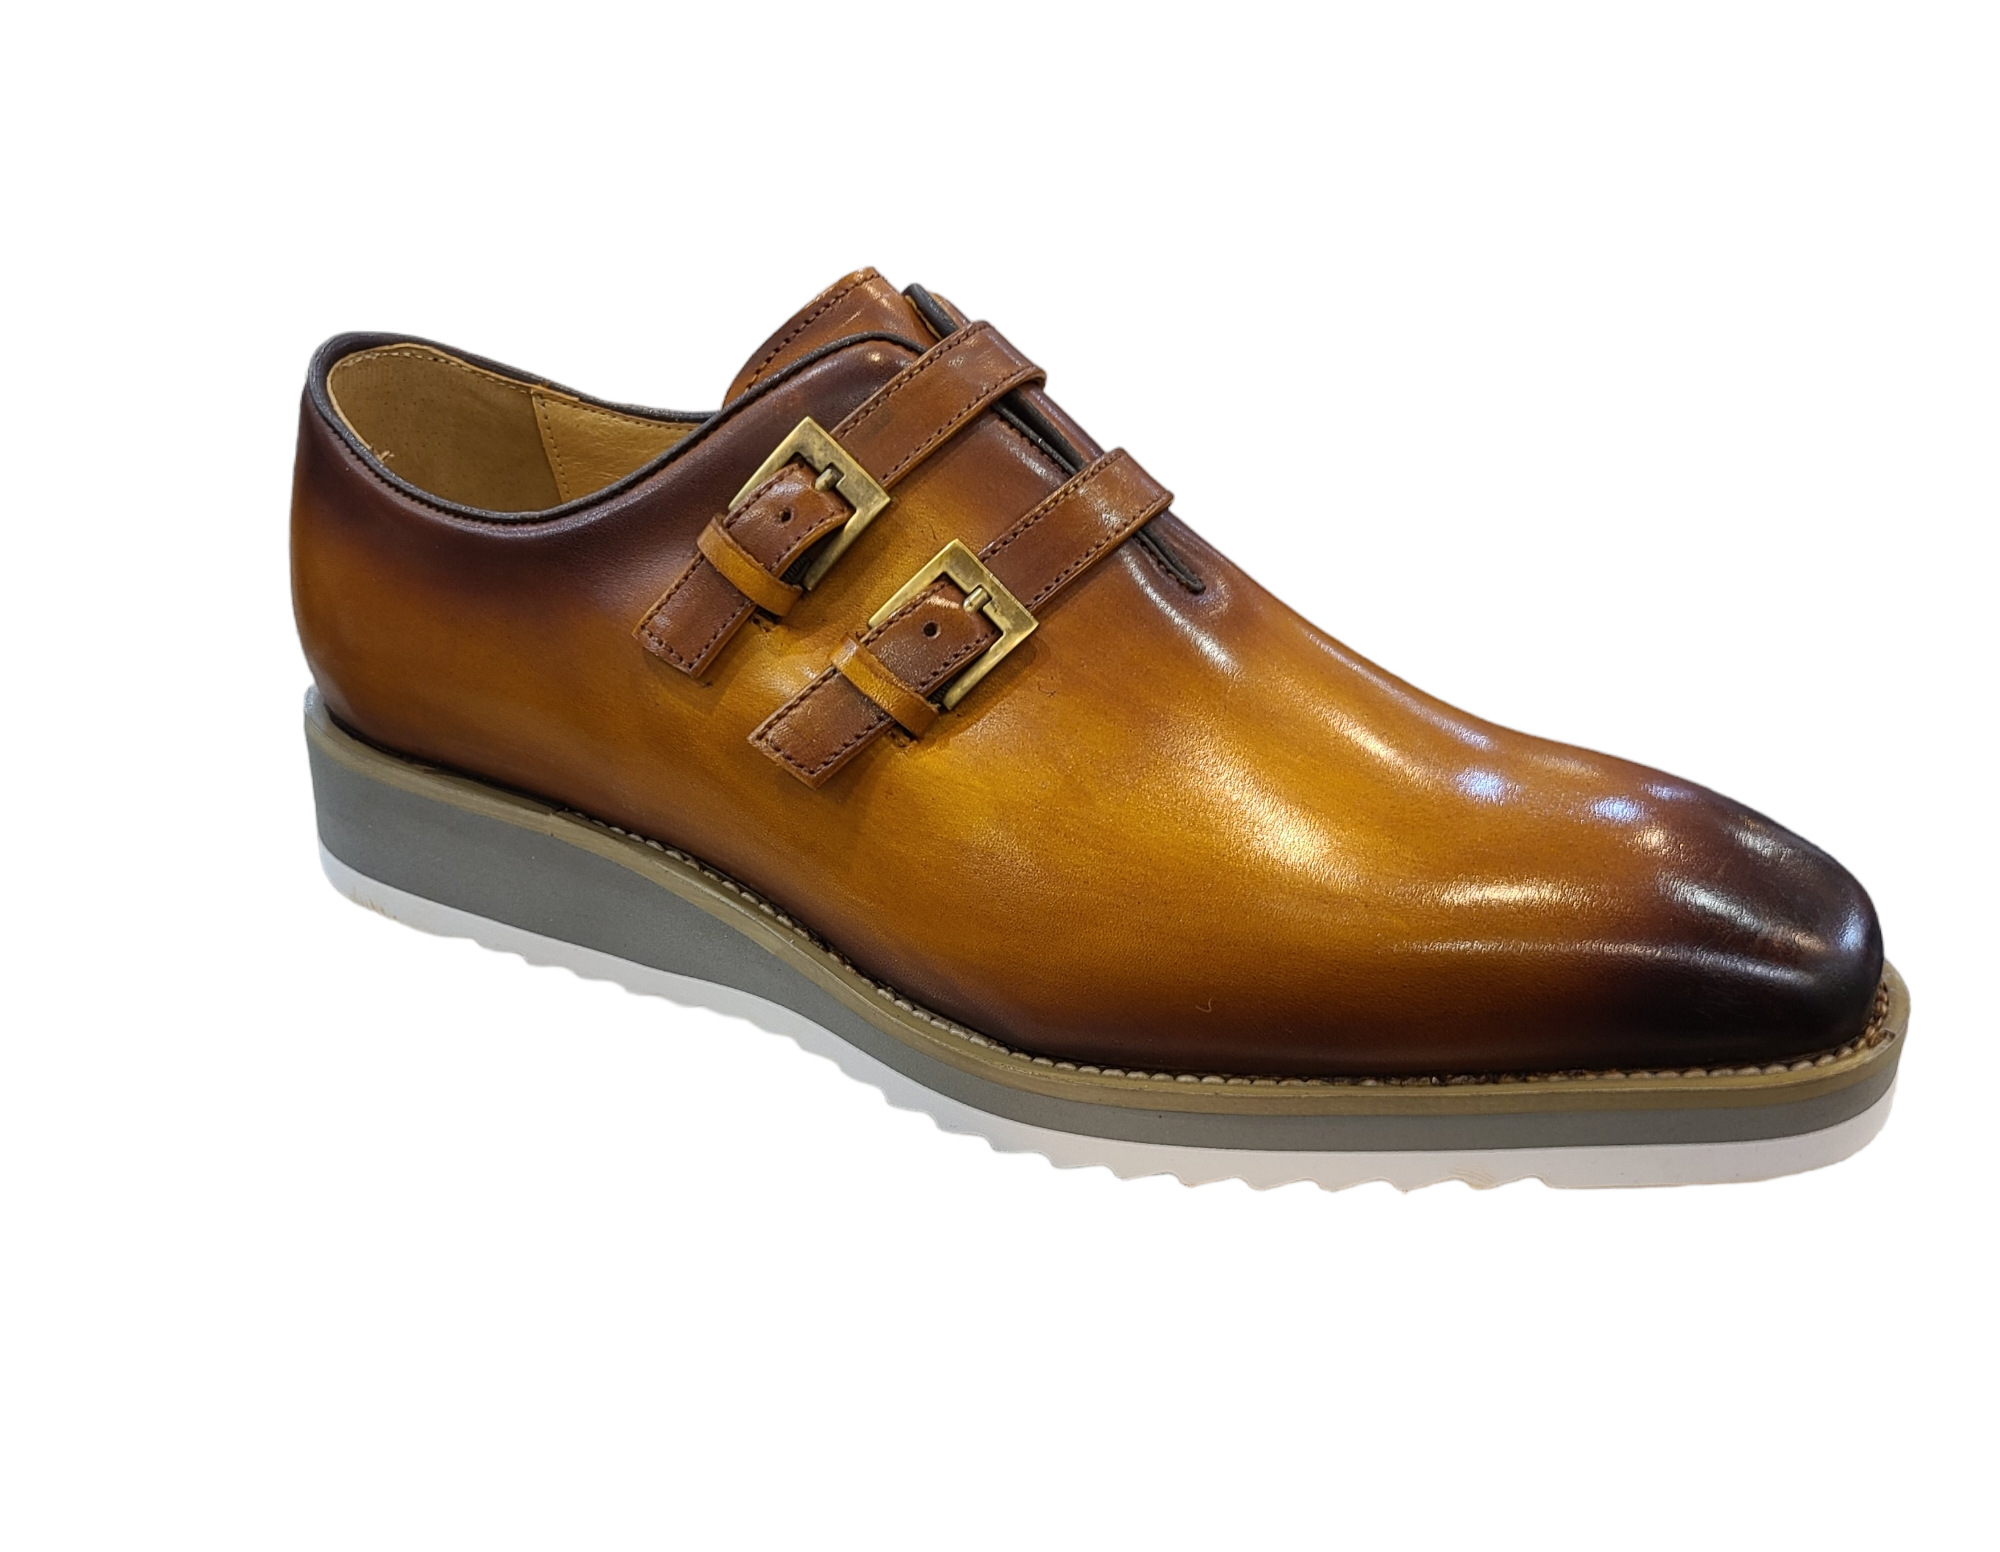 Carrucci Slip on Genuine leather Shoes